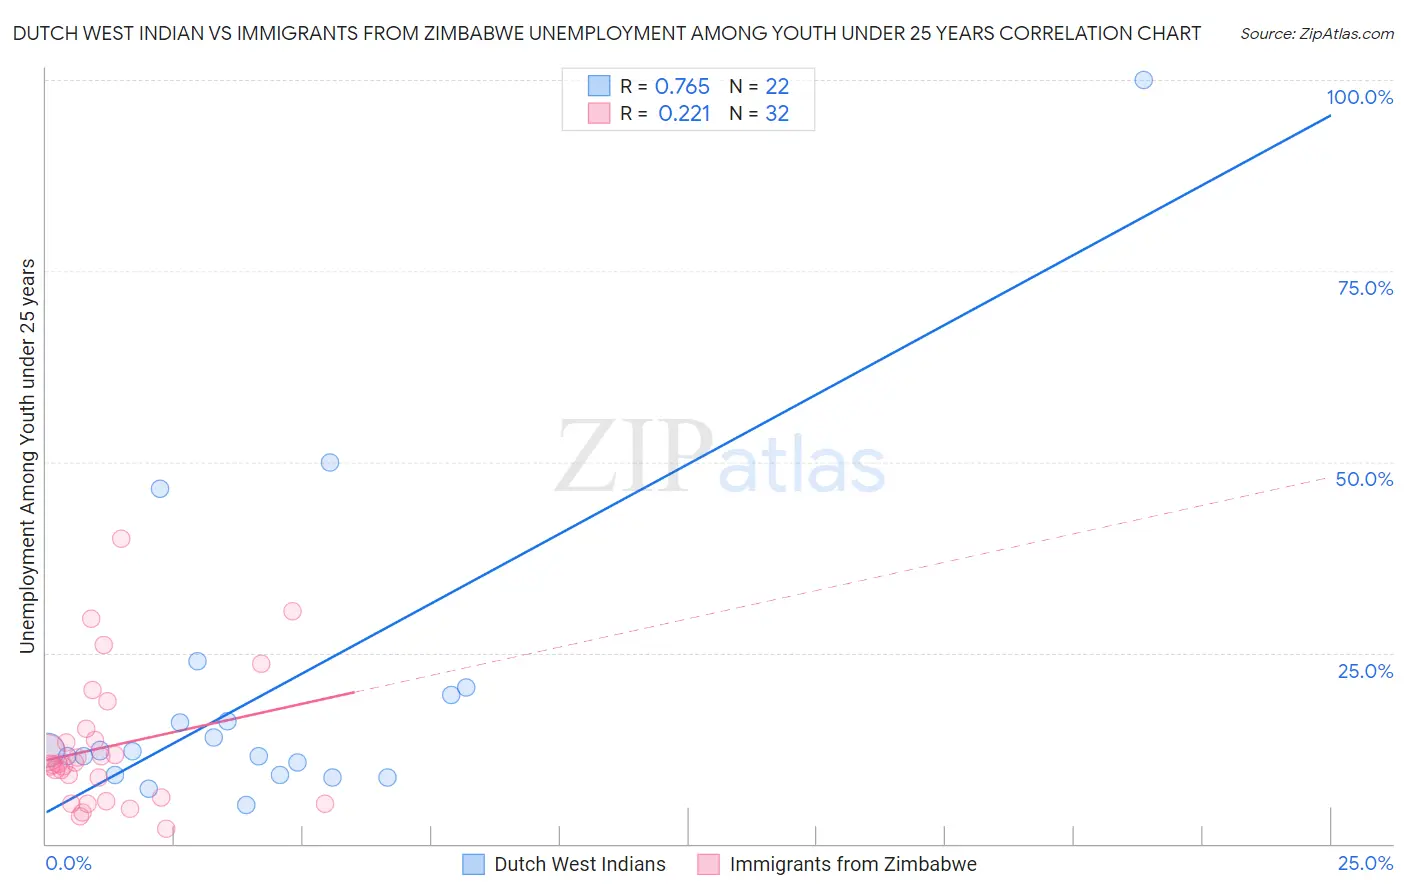 Dutch West Indian vs Immigrants from Zimbabwe Unemployment Among Youth under 25 years